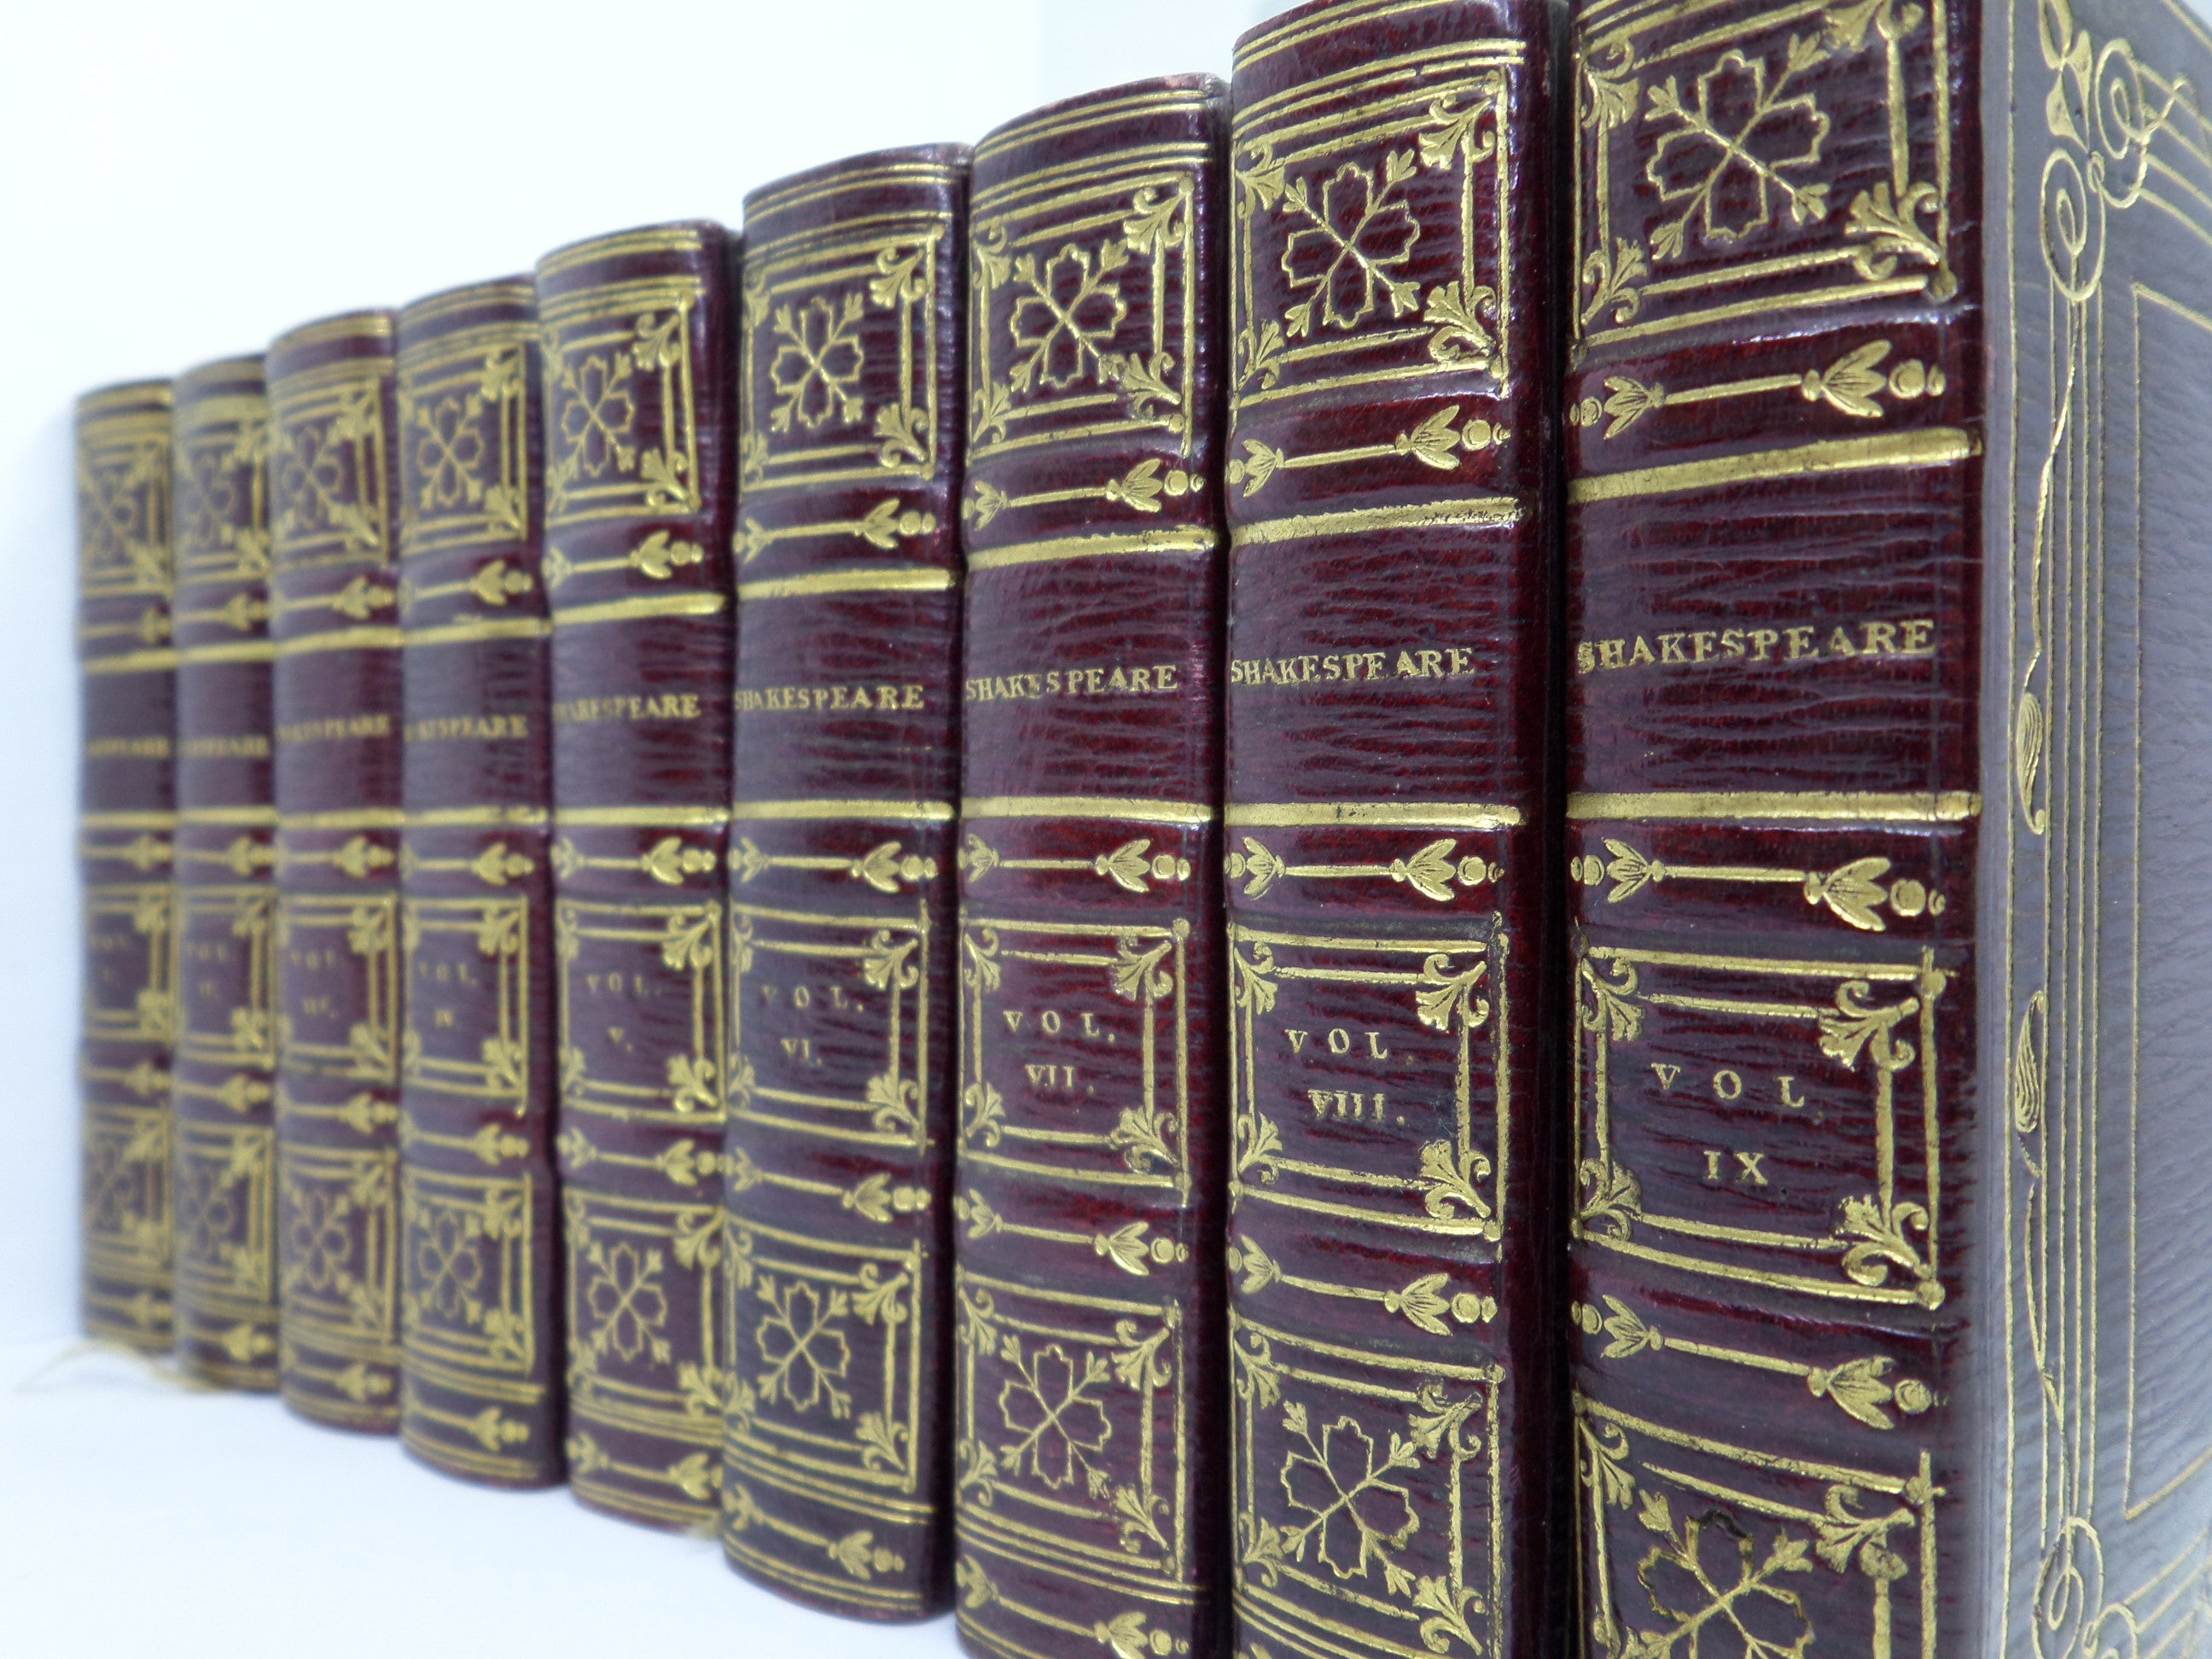 THE PLAYS OF SHAKESPEARE IN 9 MINIATURE VOLUMES 1825 FINE MOROCCO BINDINGS